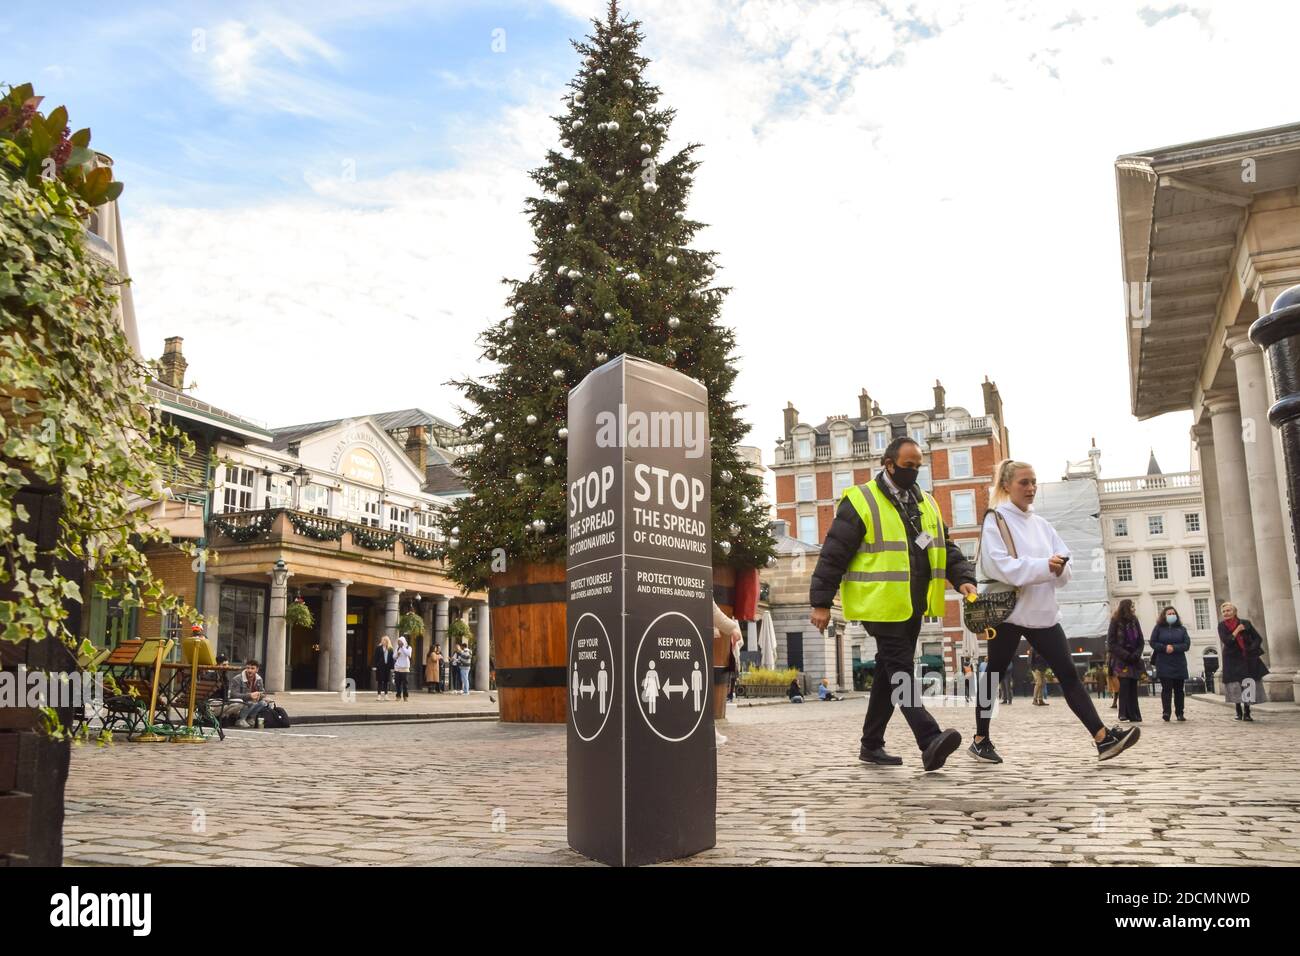 People walk past a Stop The Spread Of Coronavirus sign next to the Christmas Tree in Covent Garden, London. England is set to enforce a tough tier system once the lockdown ends on 2 December. Stock Photo